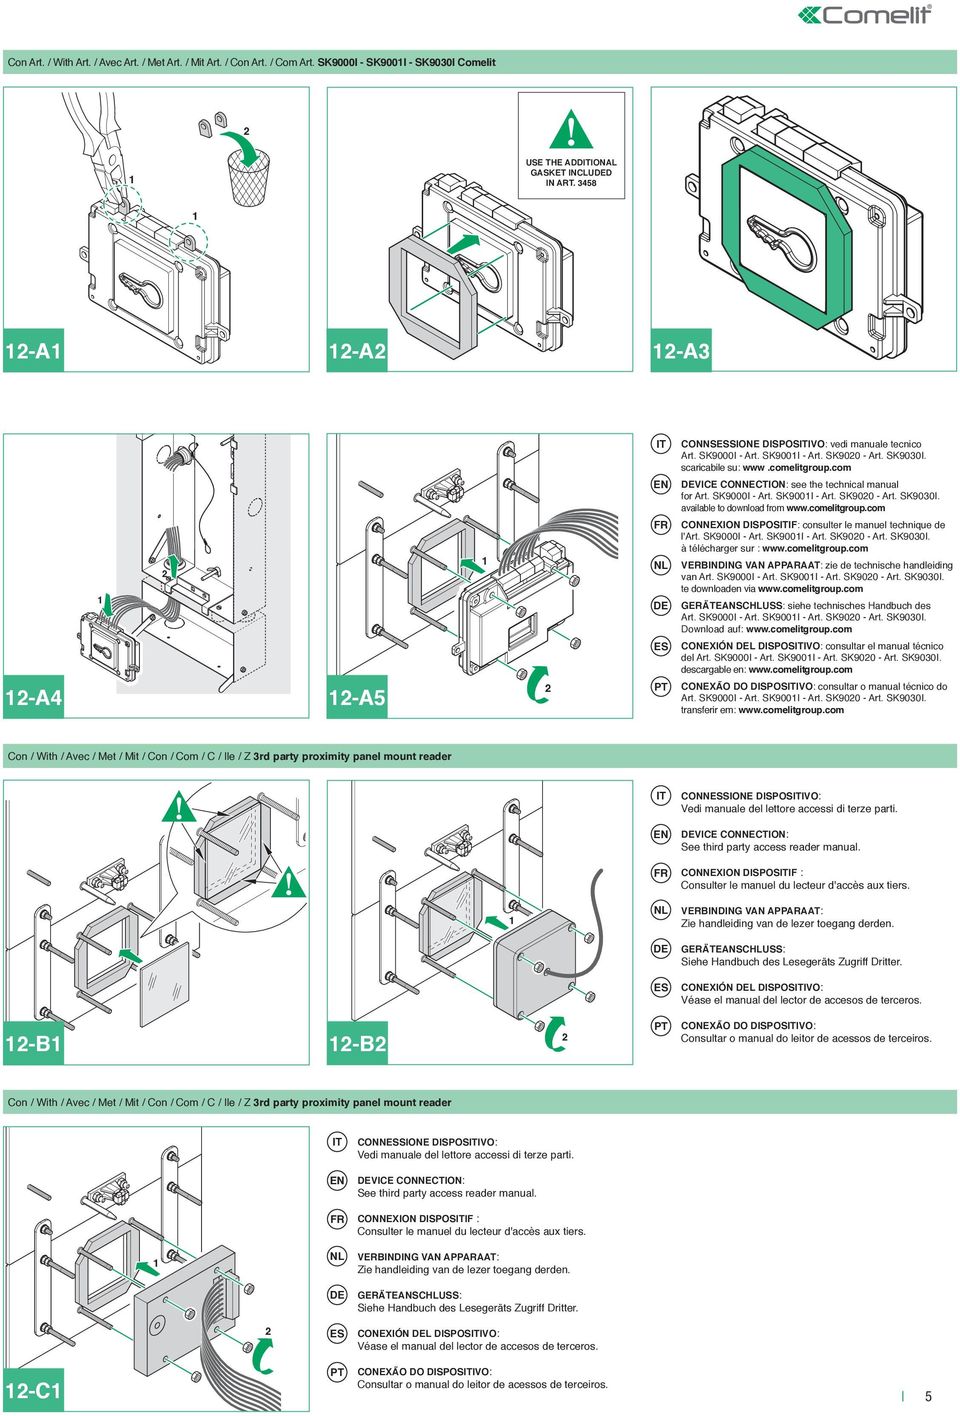 com VICE CONNECTION: see the technical manual for Art. SK9000I - Art. SK900I - Art. SK900 - Art. SK9030I. available to download from www.comelitgroup.